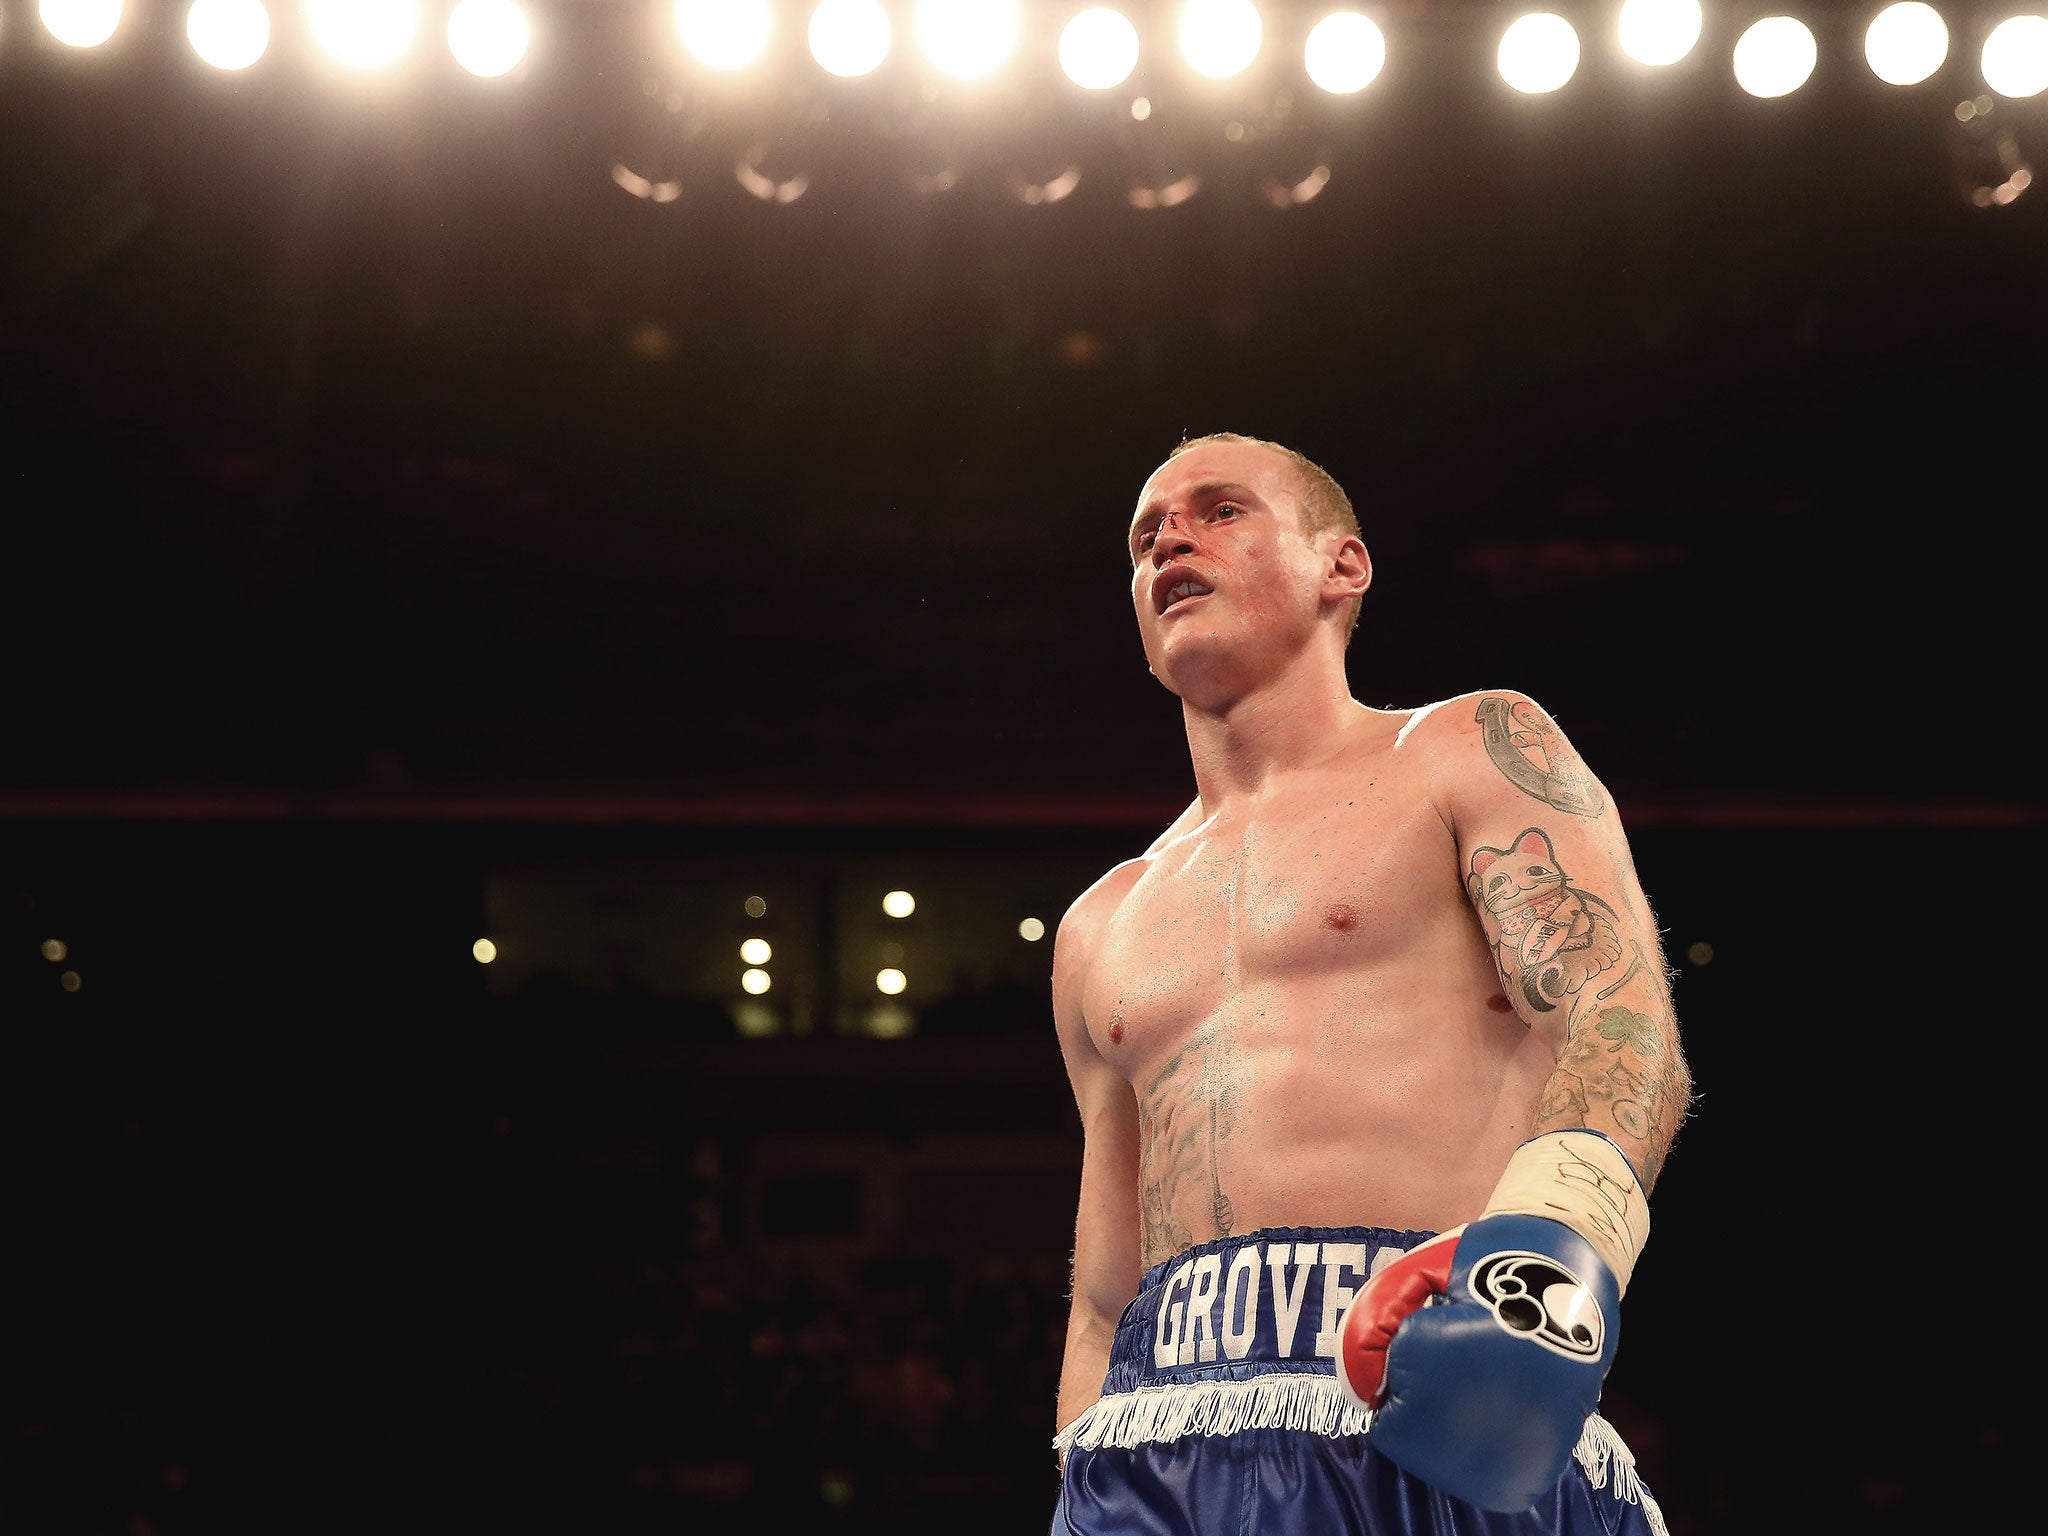 George Groves suffered a 'minor training accident' on a Royal Marines boat